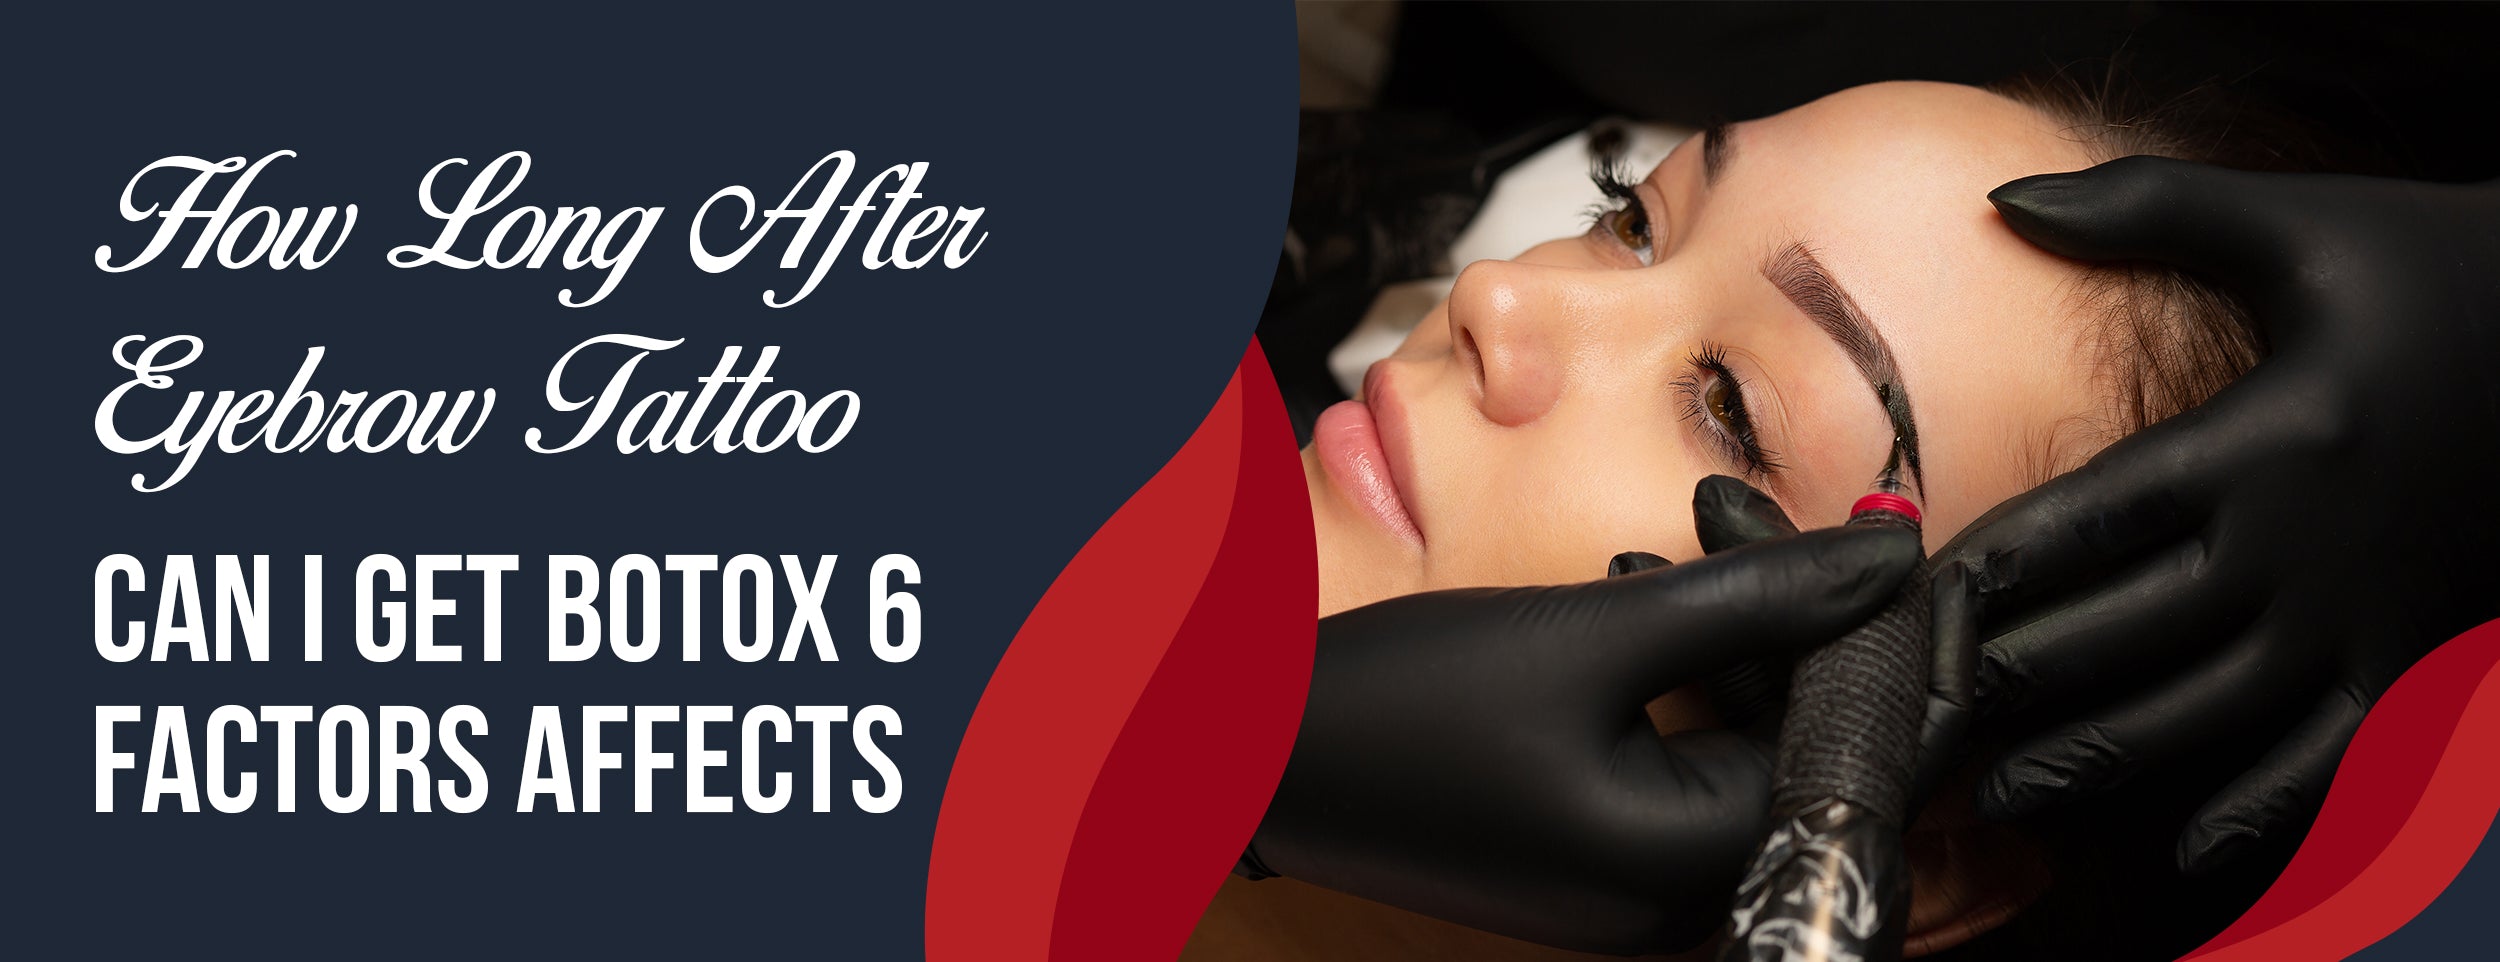 The timeframe for Botox after eyebrow tattoos 6 factors